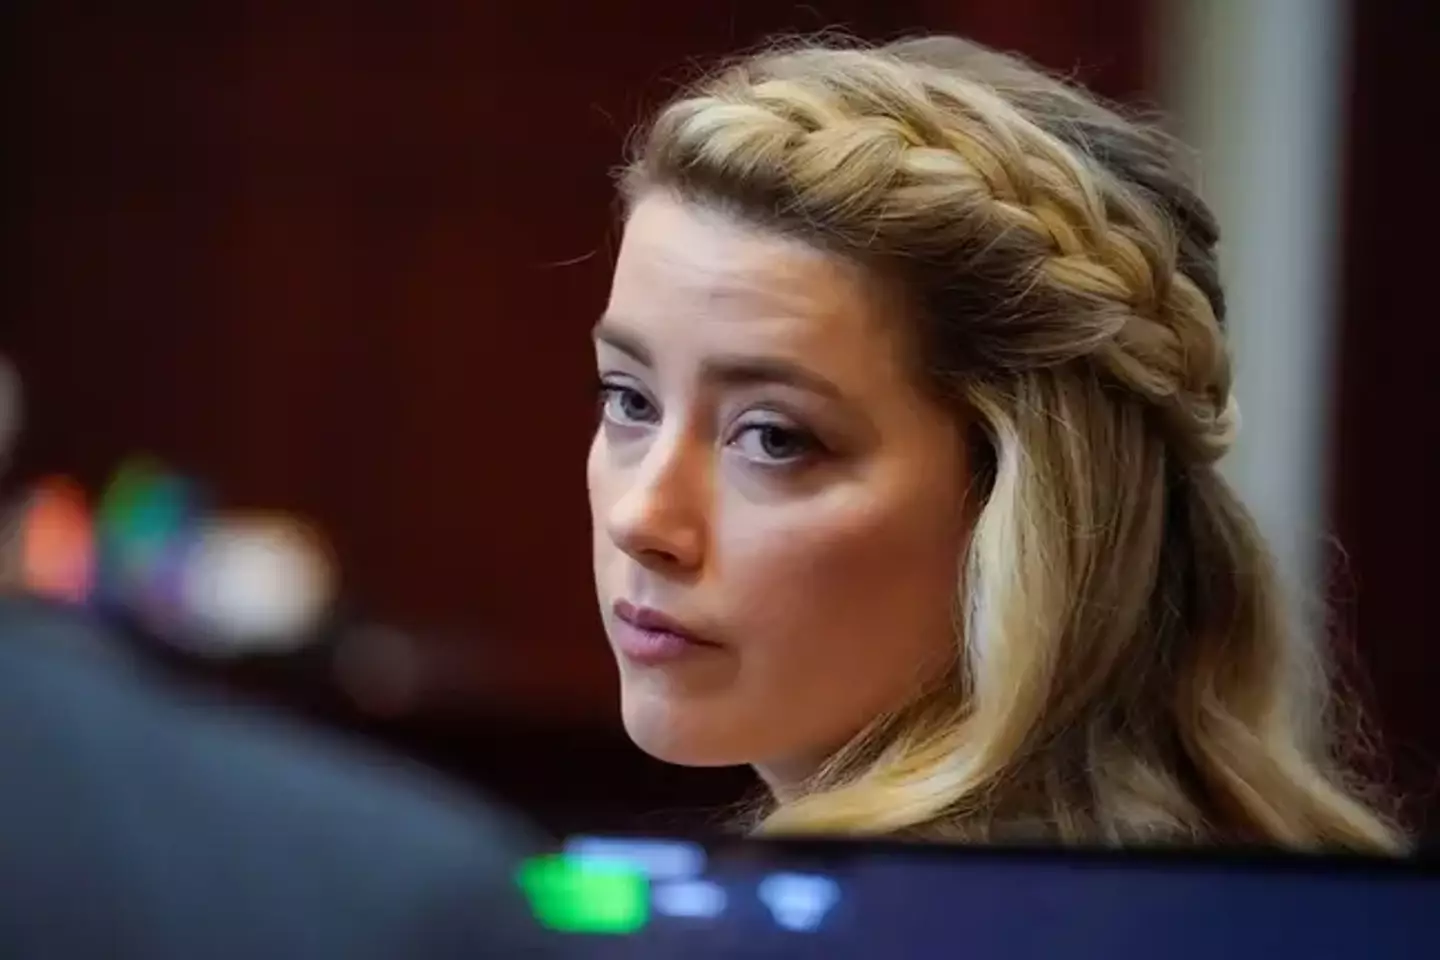 Amber Heard has spoken out in her first interview since the trial.